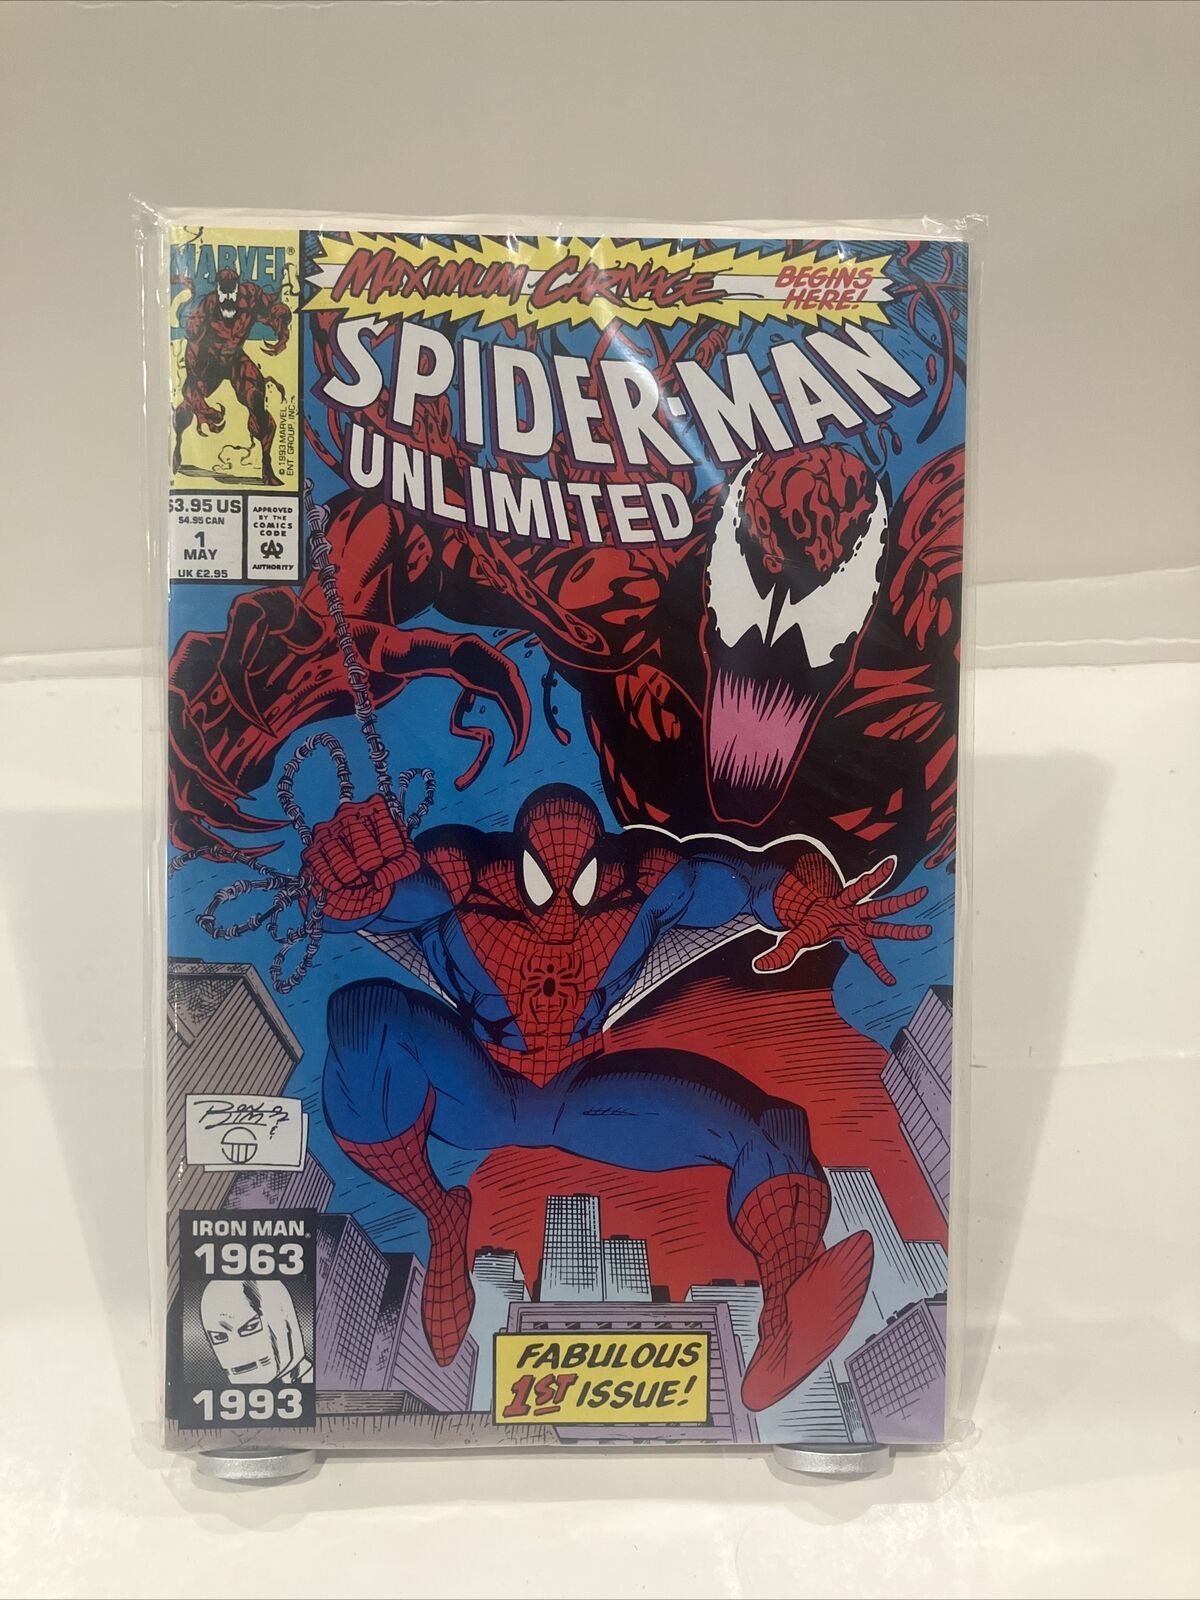 Spider-Man Unlimited #1 (Marvel, May 1993)